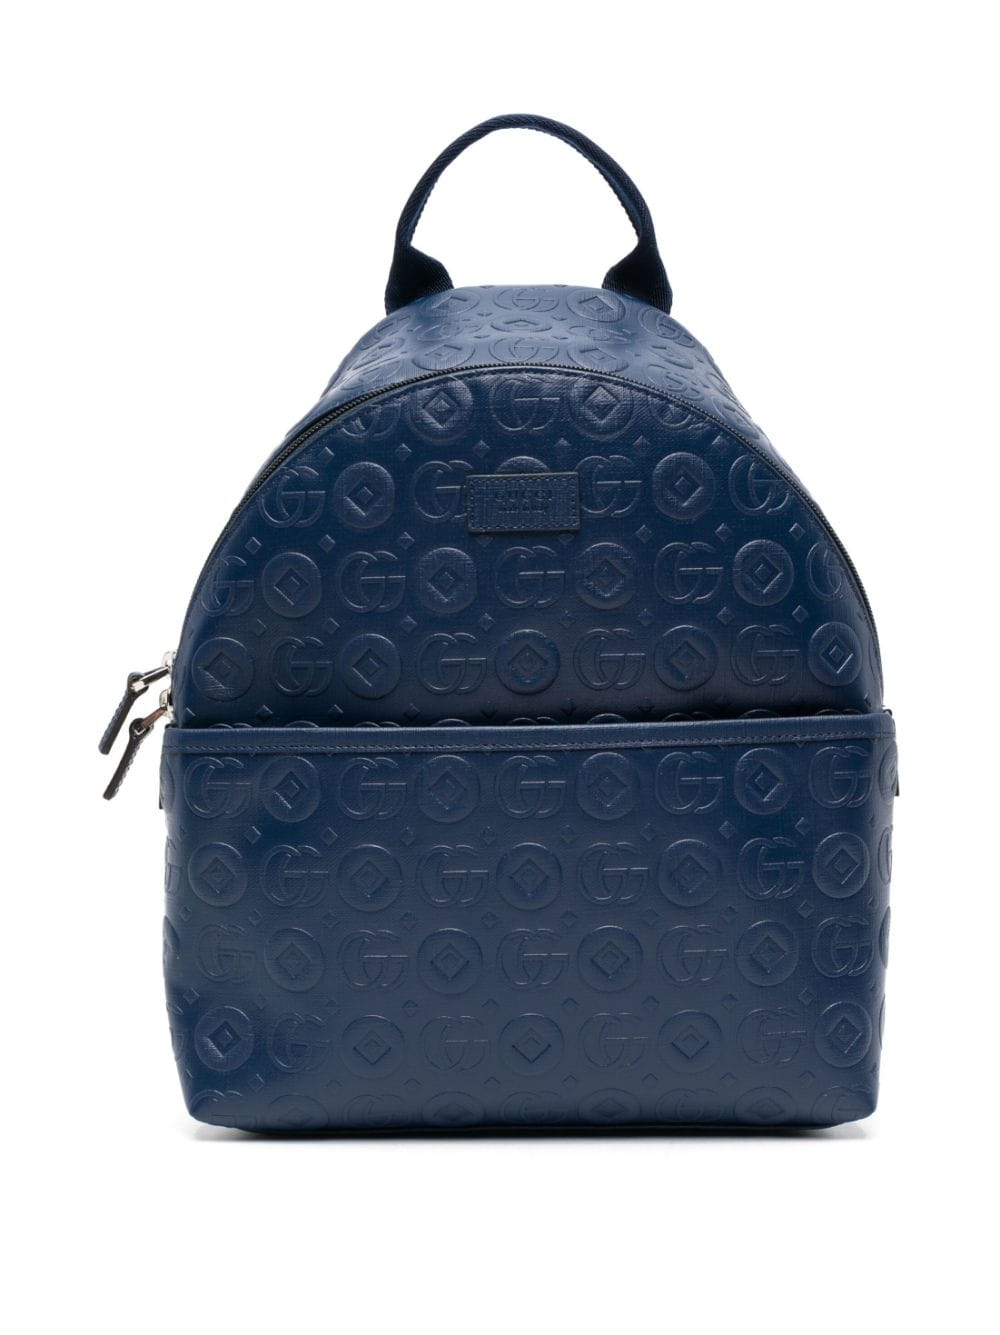 Gucci Kids embossed logo-print leather backpack - Blue von Gucci Kids